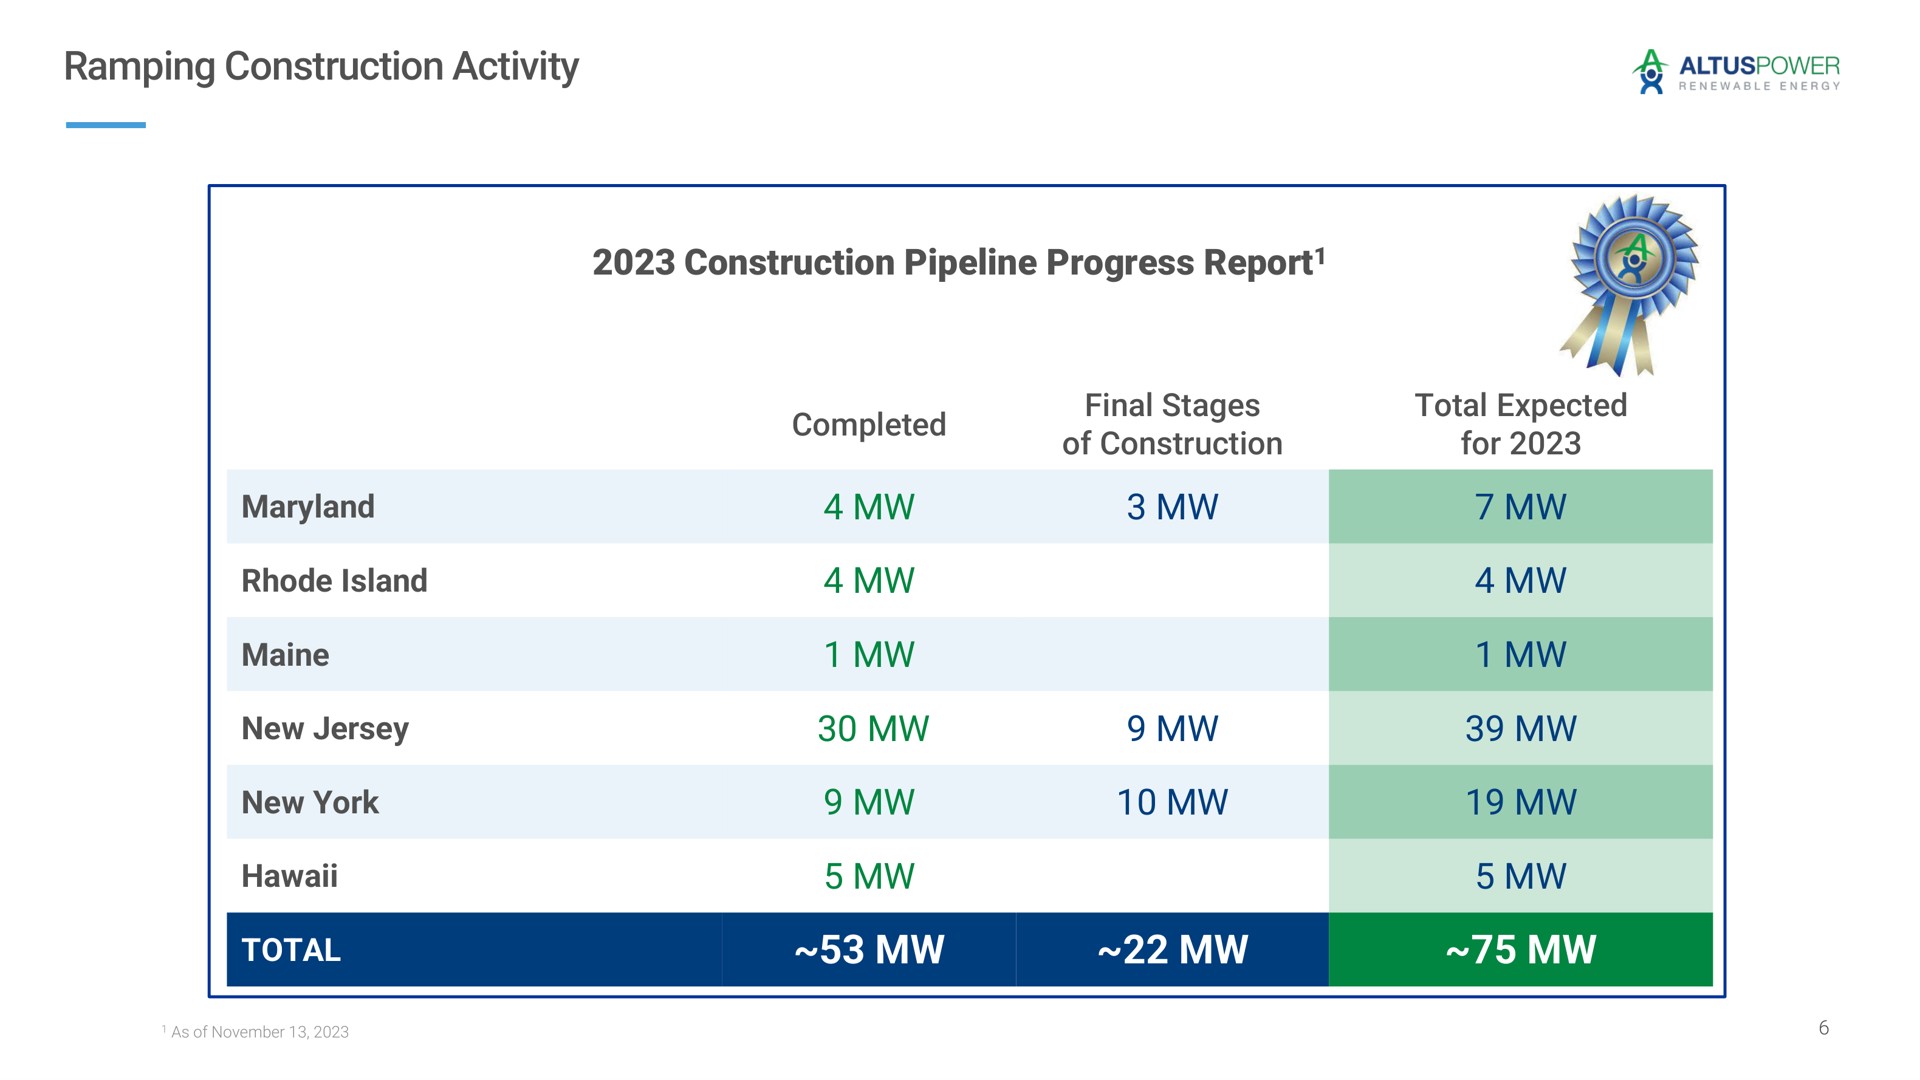 ramping construction activity construction pipeline progress report island new jersey new york total completed final stages of construction total expected for report | Altus Power